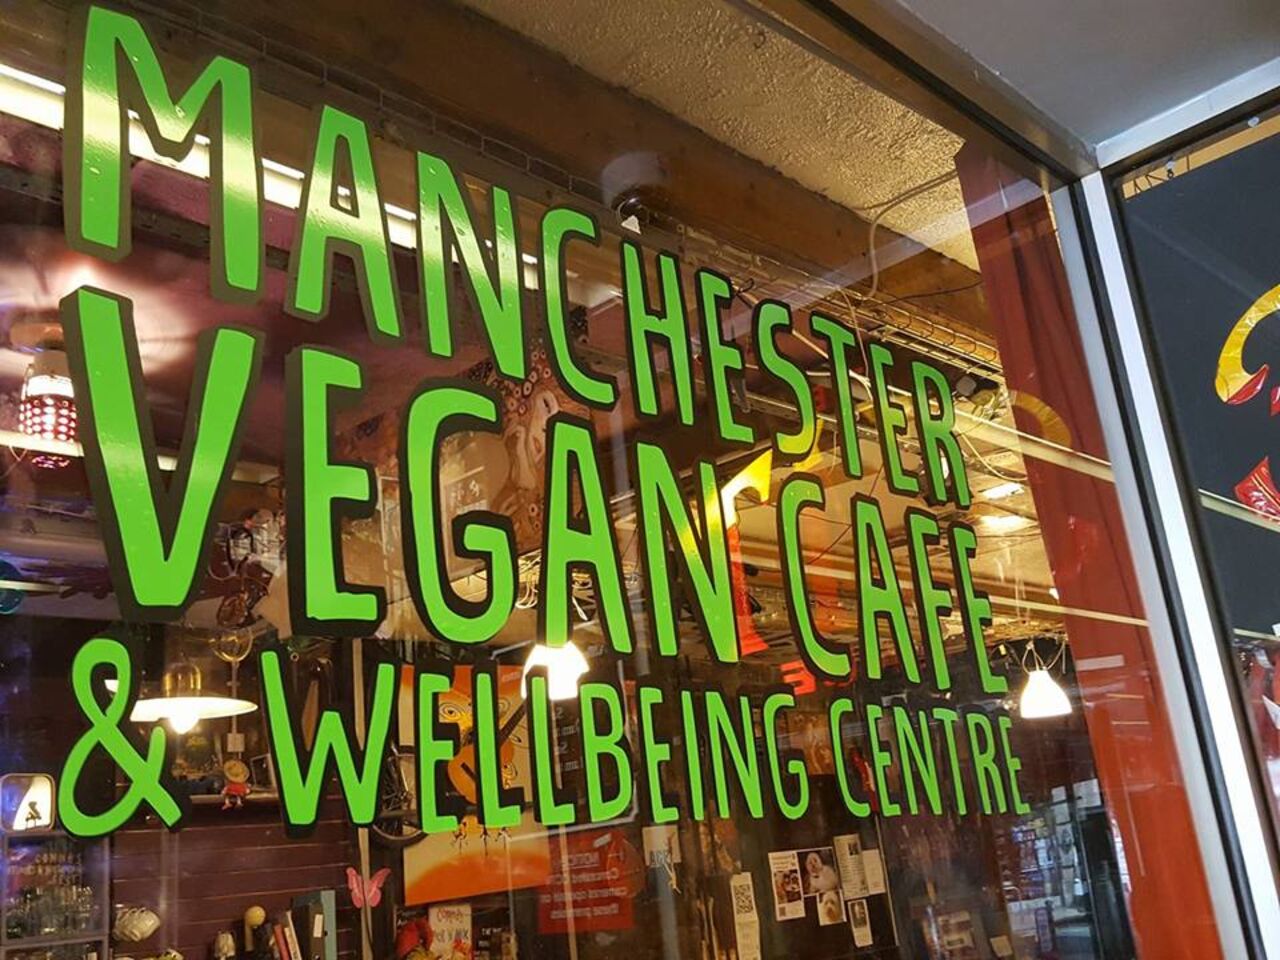 A photo of Manchester Vegan Café and Wellbeing Centre